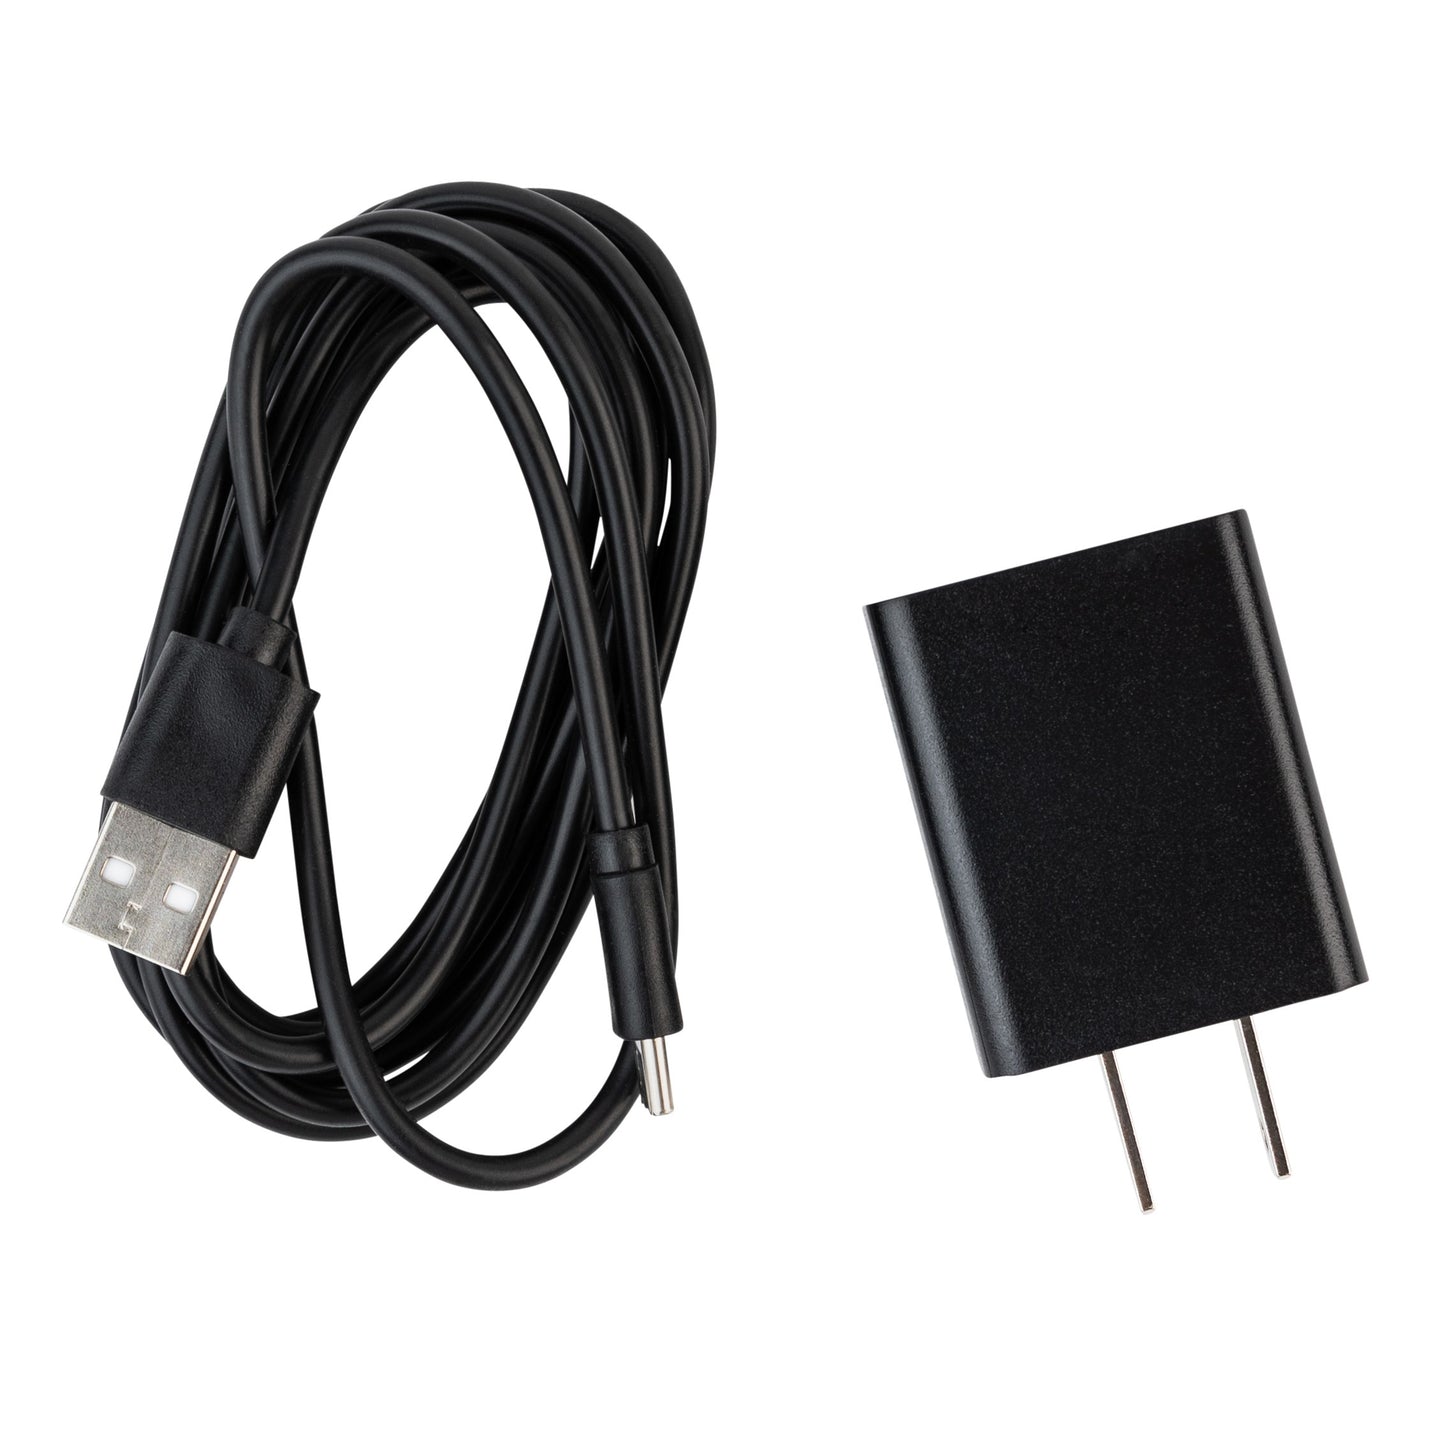 Extra Power Adapter for SEREONIC Wireless TV Speaker for Smart TV. Works with BT-200, BT-200B, & BT-200GS. Keep Your Speaker Next to You and Connected for Continuous Use with 6ft Cable.